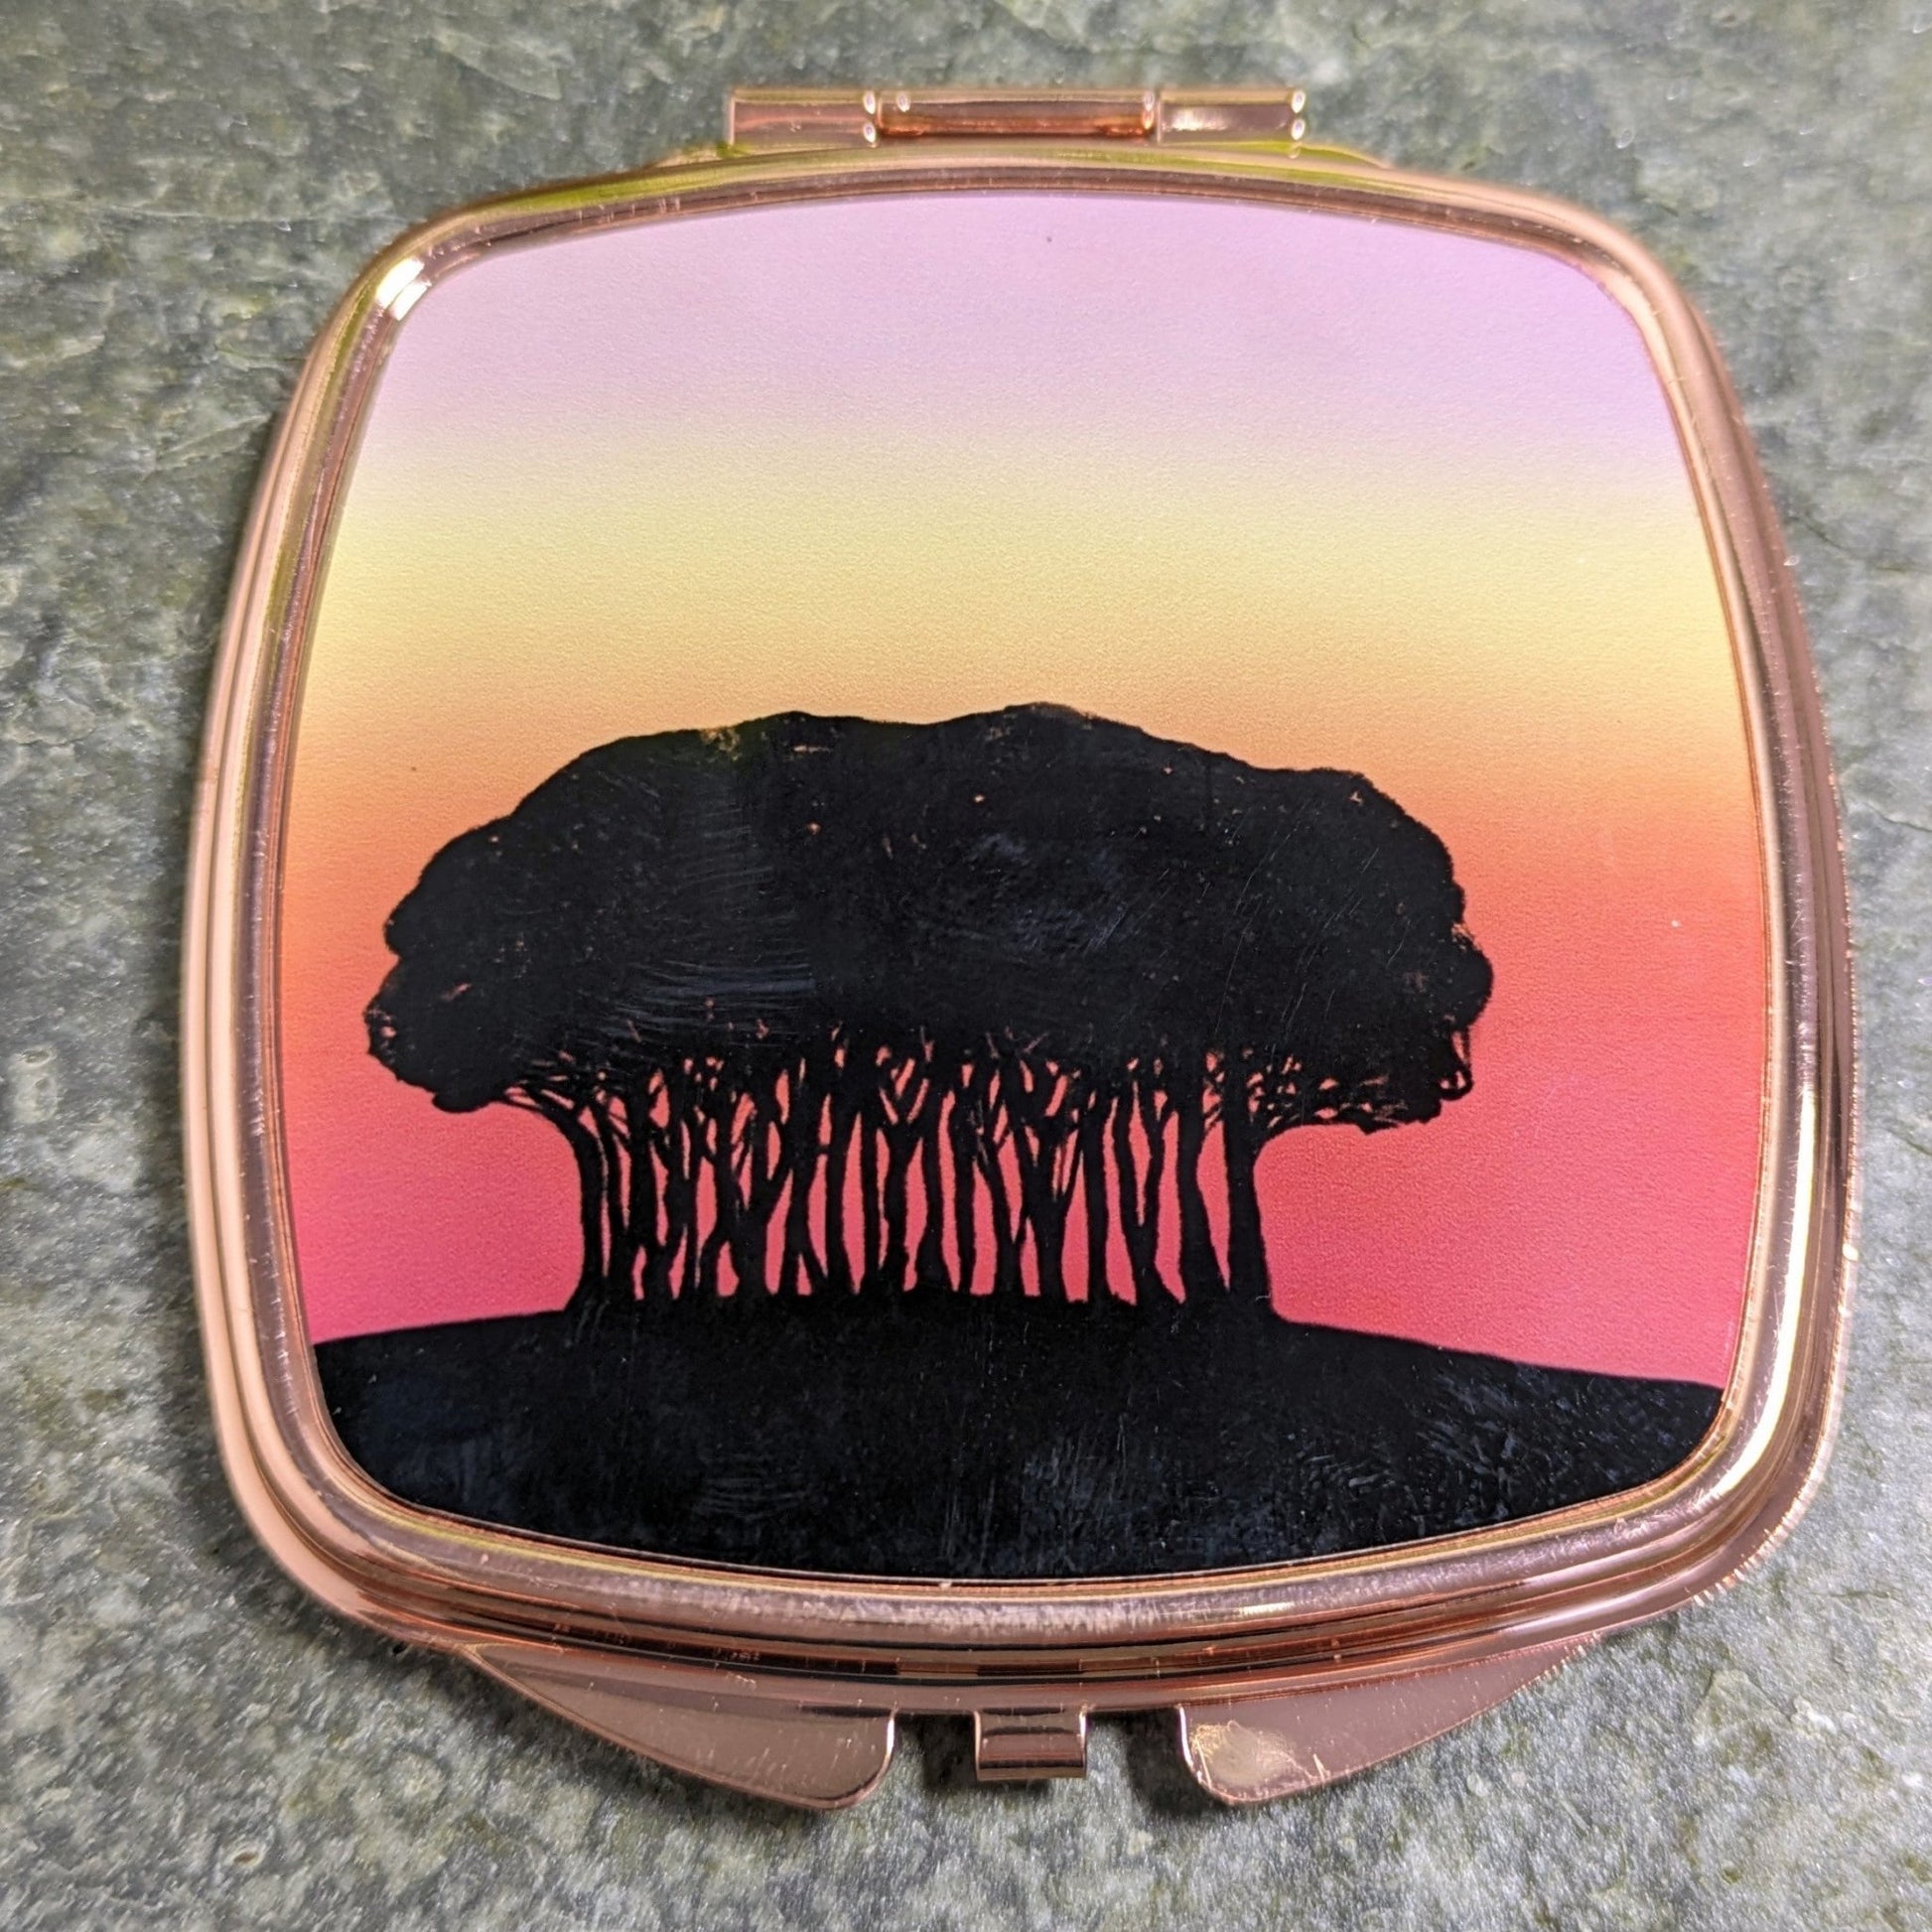 Rose Gold Curved square compact mirrors - artcoasterprinting